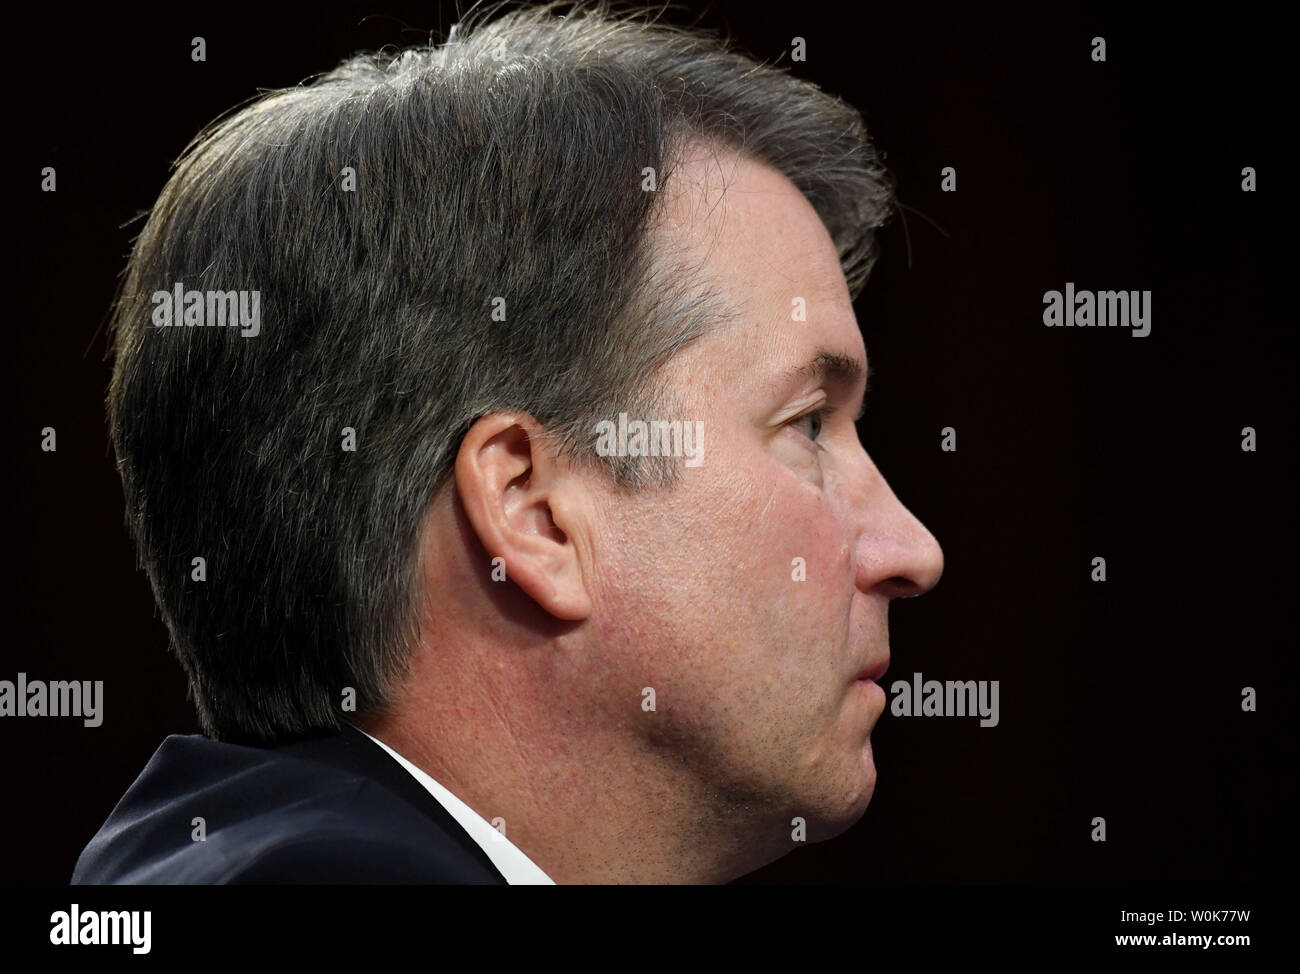 Supreme Court Justice nominee Brett M. Kavanaugh testifies during his Senate Judiciary Committee confirmation hearing for the Supreme Court on Capitol Hill in Washington, DC on September 4, 2018. Judge Kavanaugh was nominated to fill the seat of Justice Anthony M. Kennedy who announced his retirement in June.  Photo by Pat Benic/UPI Stock Photo